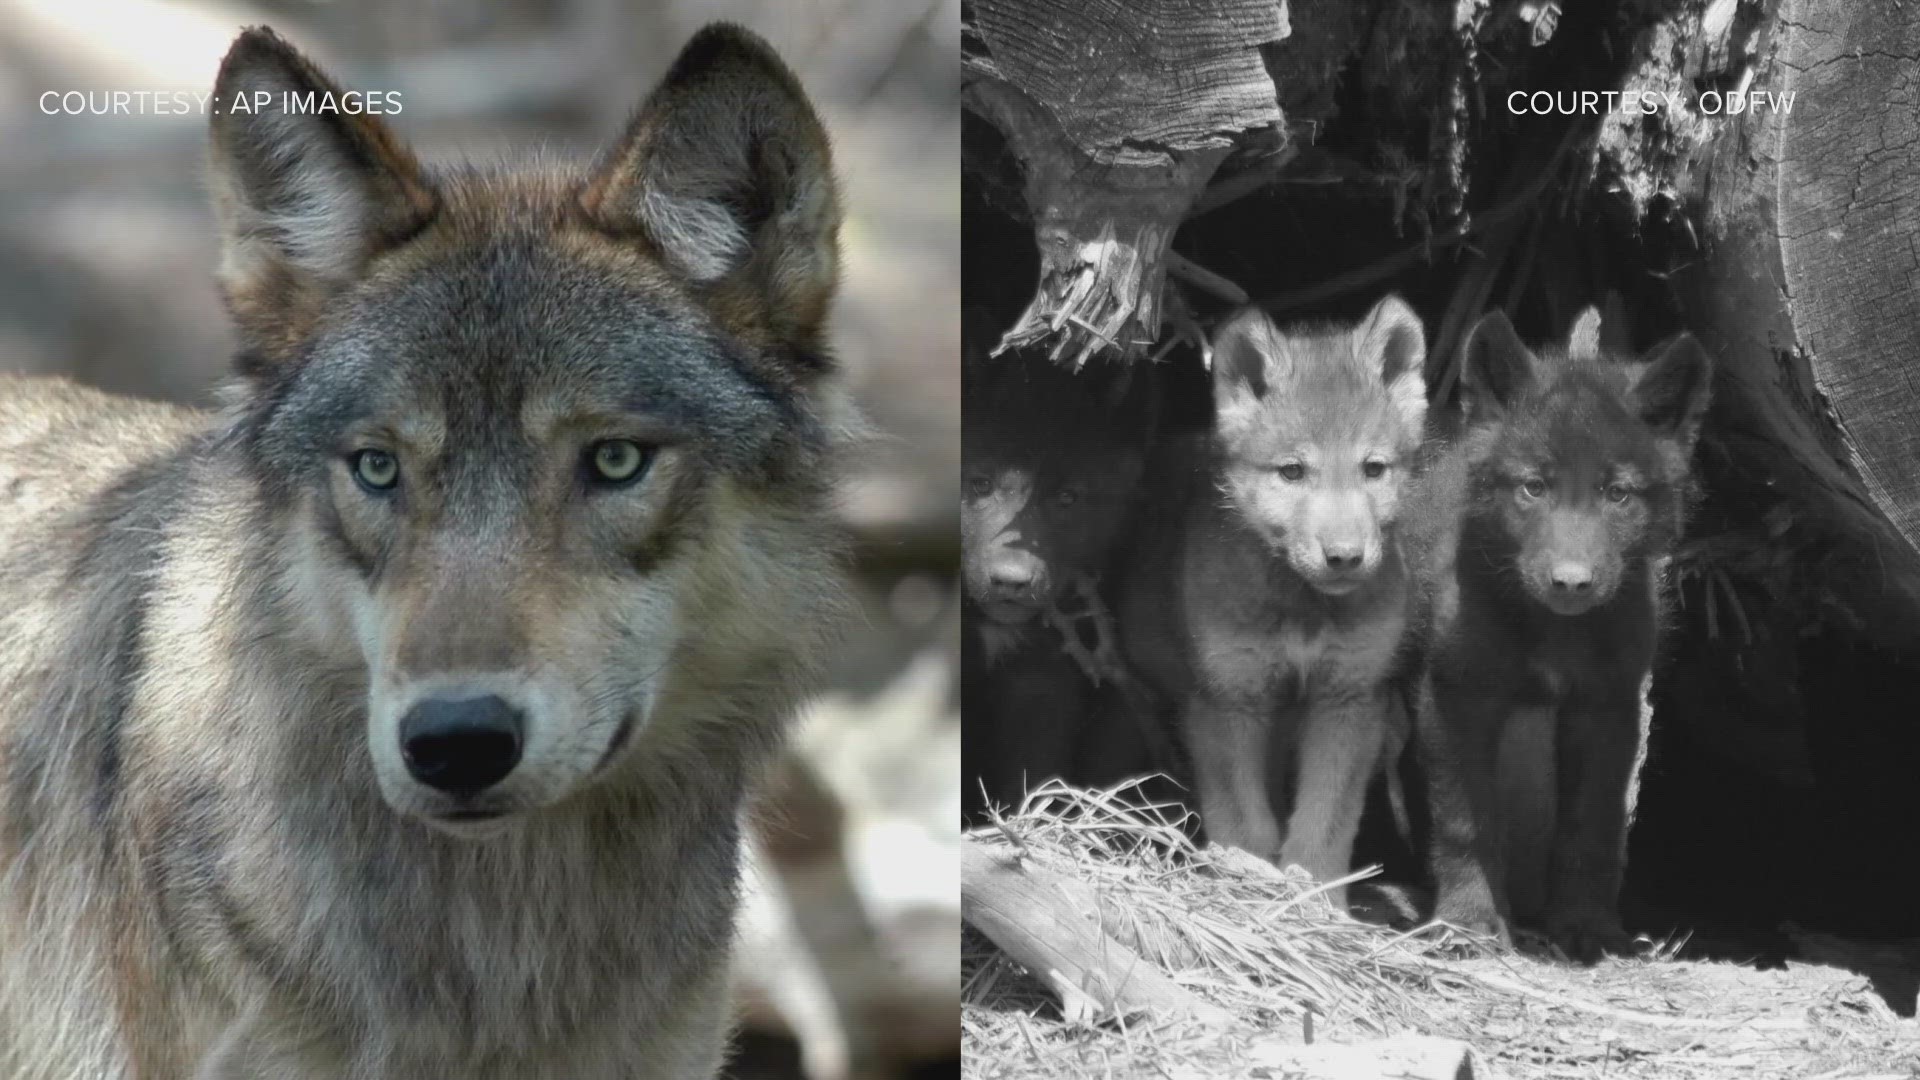 Colorado Parks and Wildlife says things are going according to plan when it comes to re-introducing wolves.